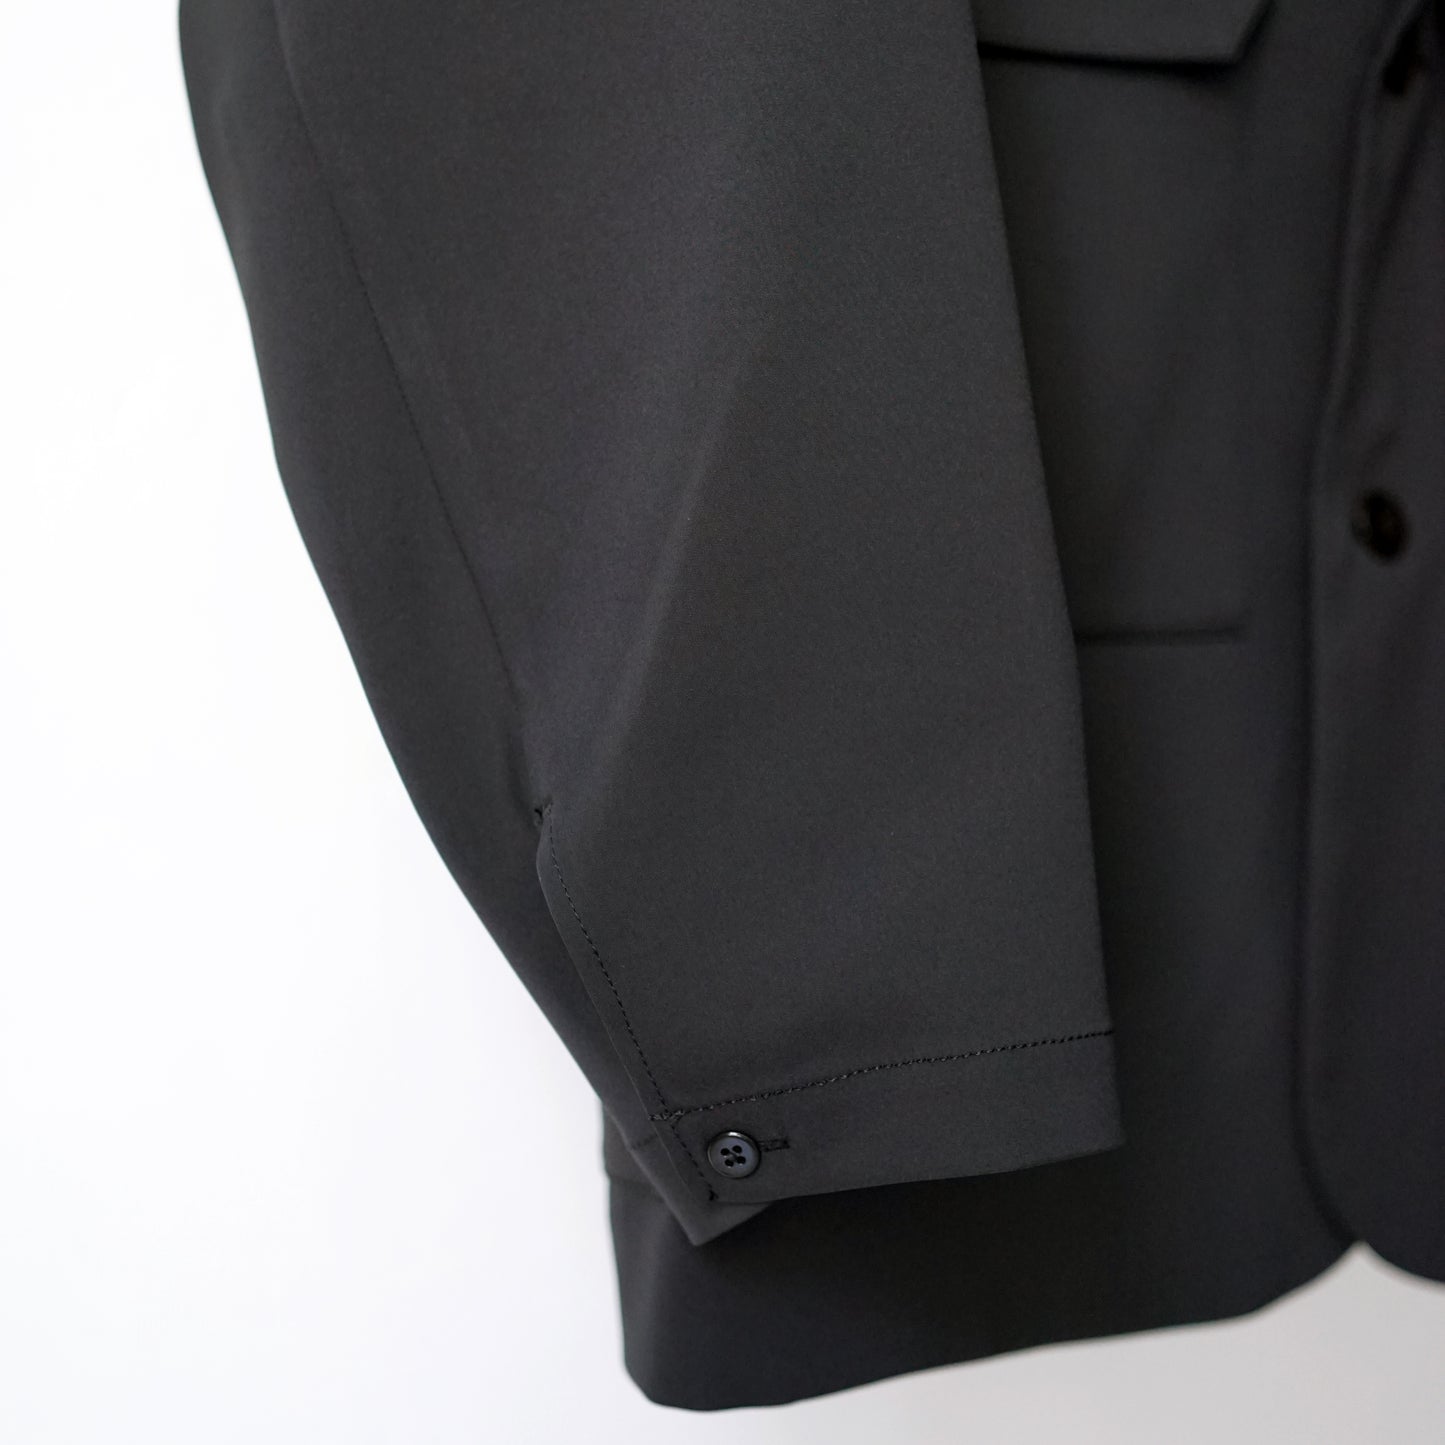 Tremolo【トレモロ】Care Free Pocket Tailored Jacket (2 COLOR)